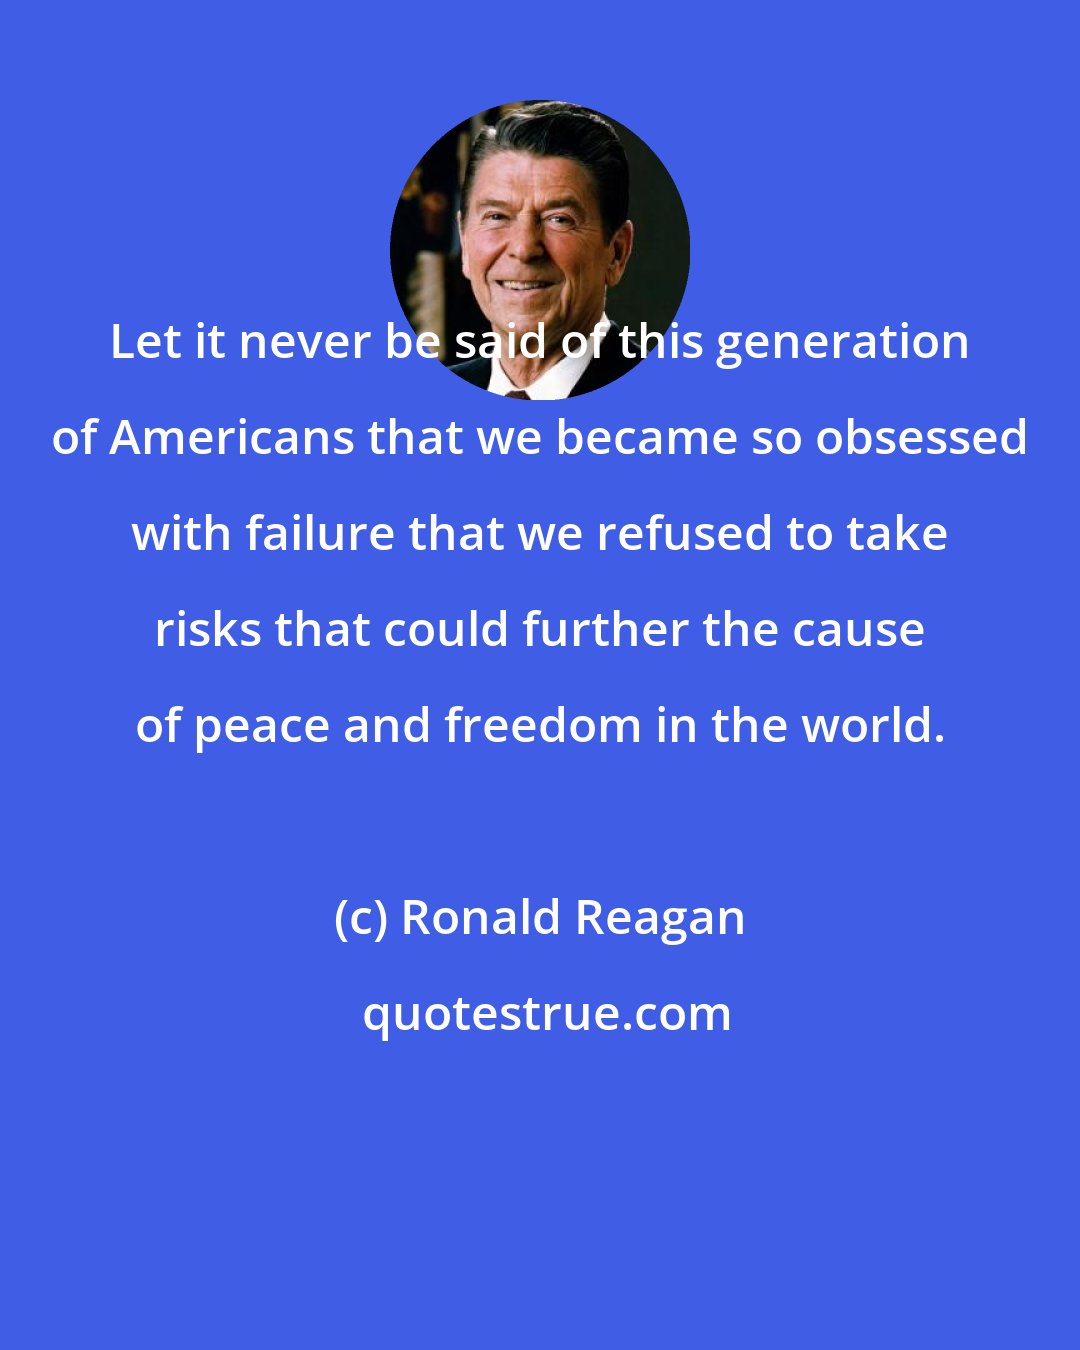 Ronald Reagan: Let it never be said of this generation of Americans that we became so obsessed with failure that we refused to take risks that could further the cause of peace and freedom in the world.